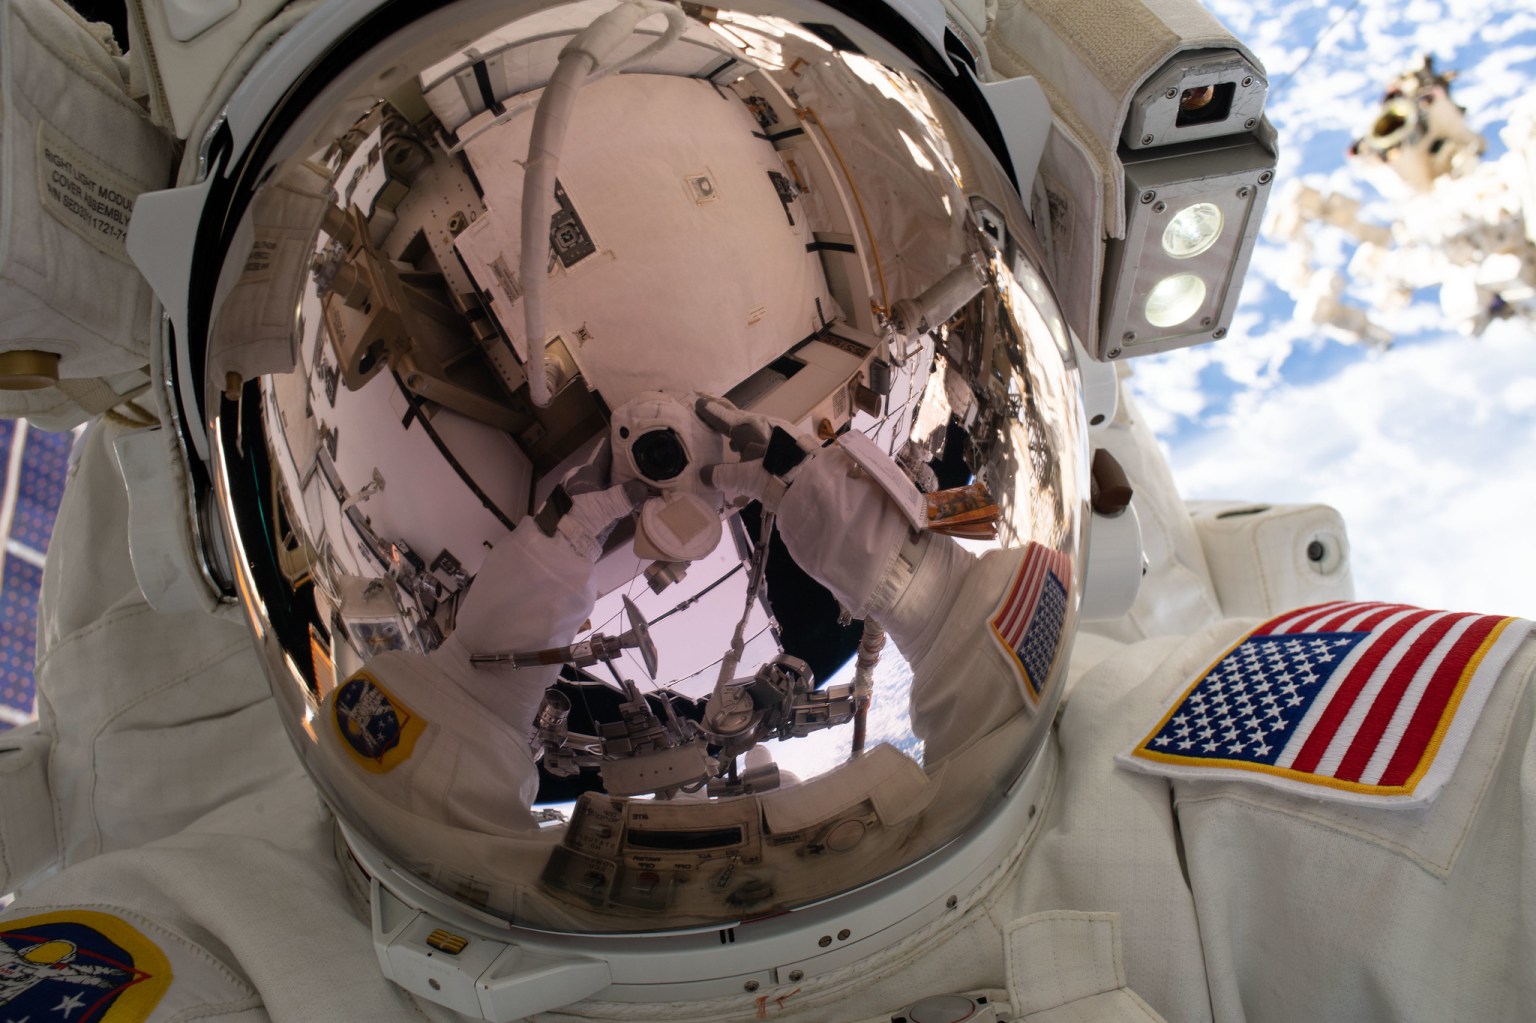 NASA astronaut Nick Hague takes an out-of-this-world "space-selfie" 250 miles above Earth during a spacewalk to upgrade the International Space Station's power storage capacity.